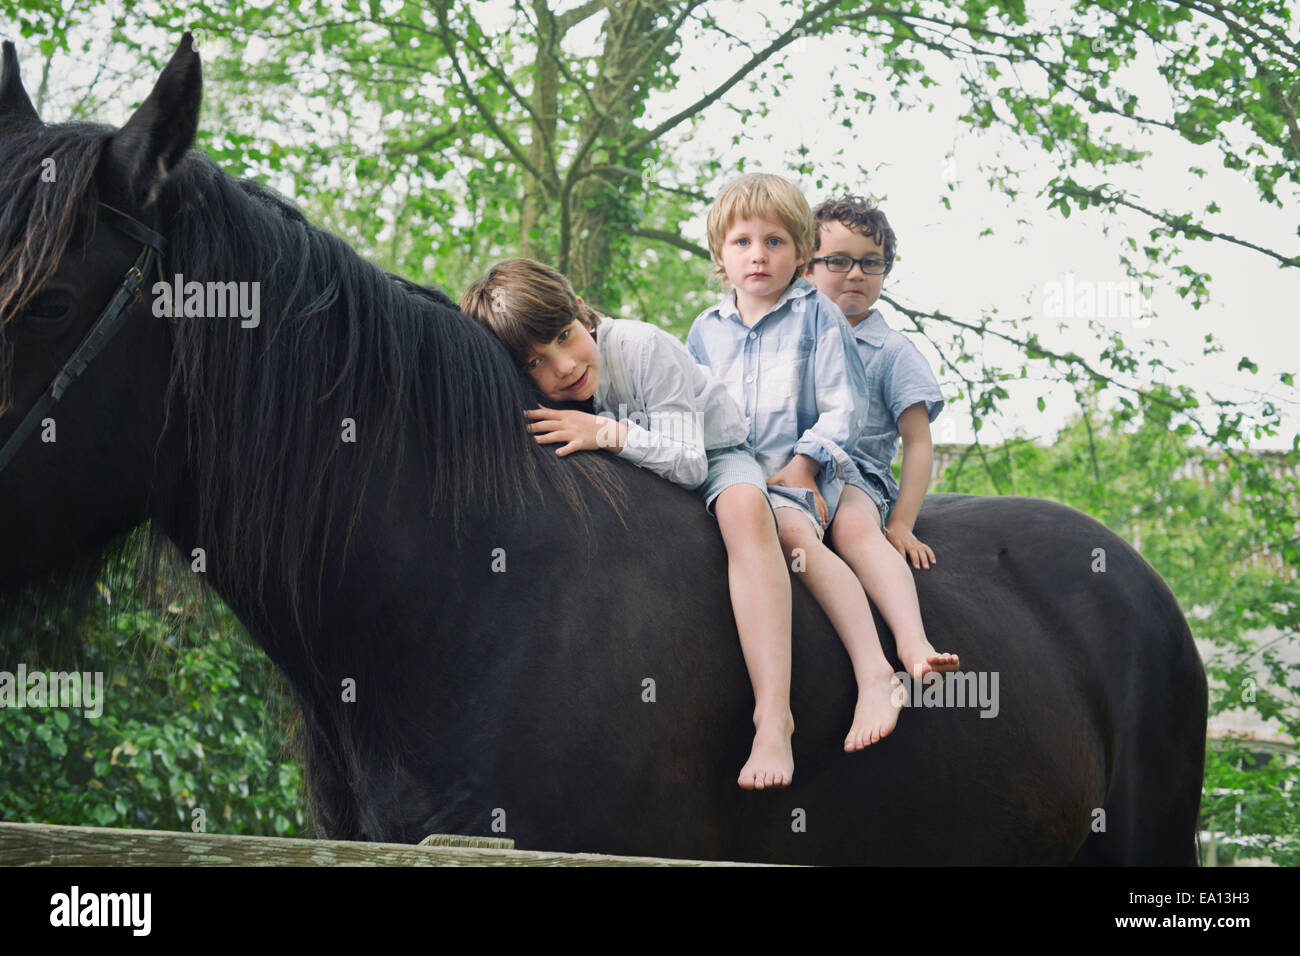 Three boys in a row riding on horse in woods Stock Photo